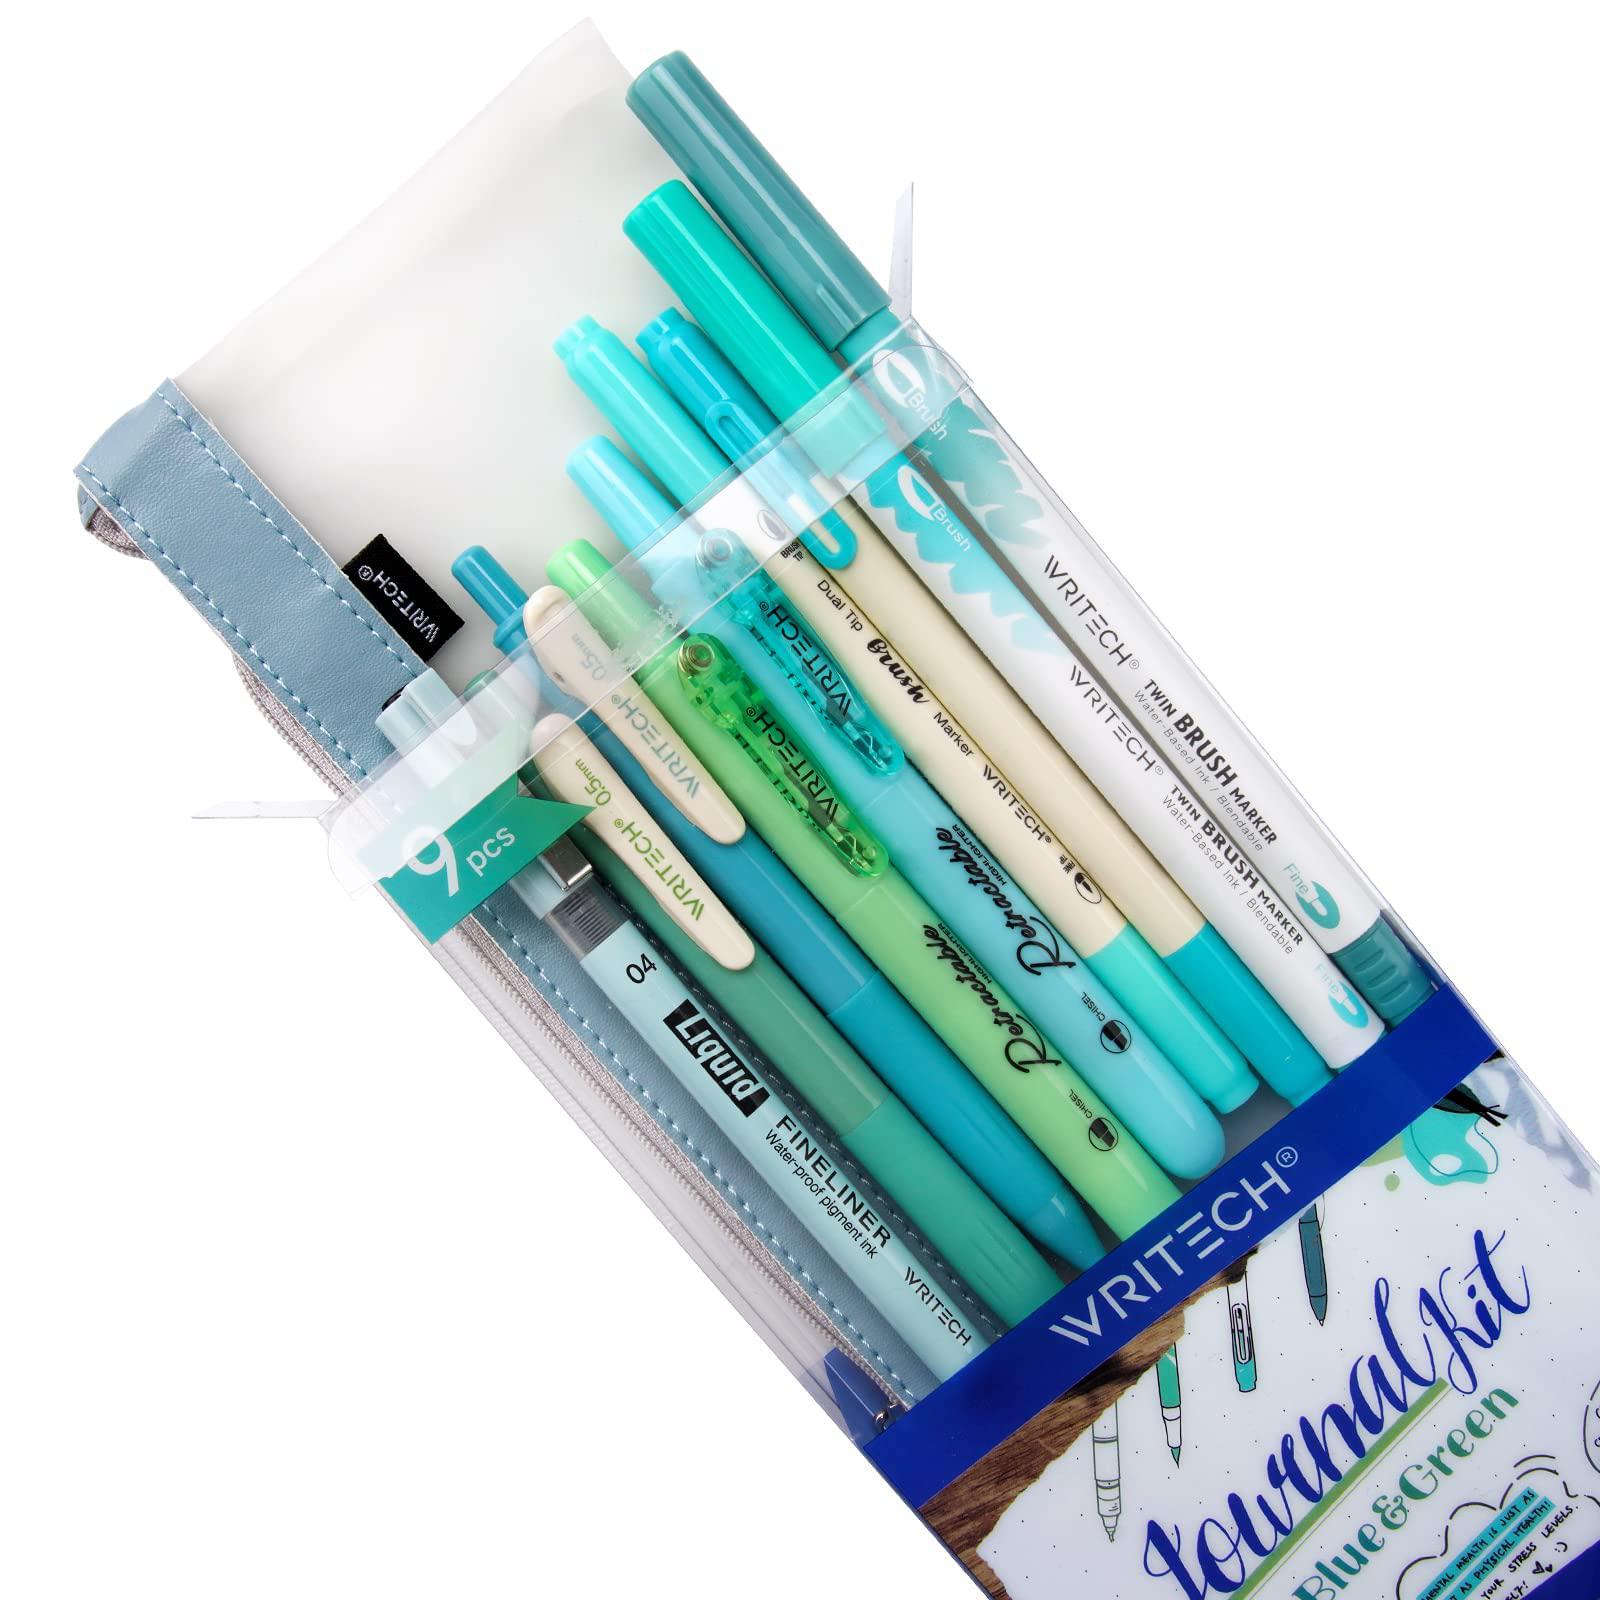 WRITECH Journaling Kit, Gel Ink Pens/Retractable Highlighters/Dual Tip Brush Pens/Fineliner Pens, Smooth Writing Assorted Colors Journaling Supplies